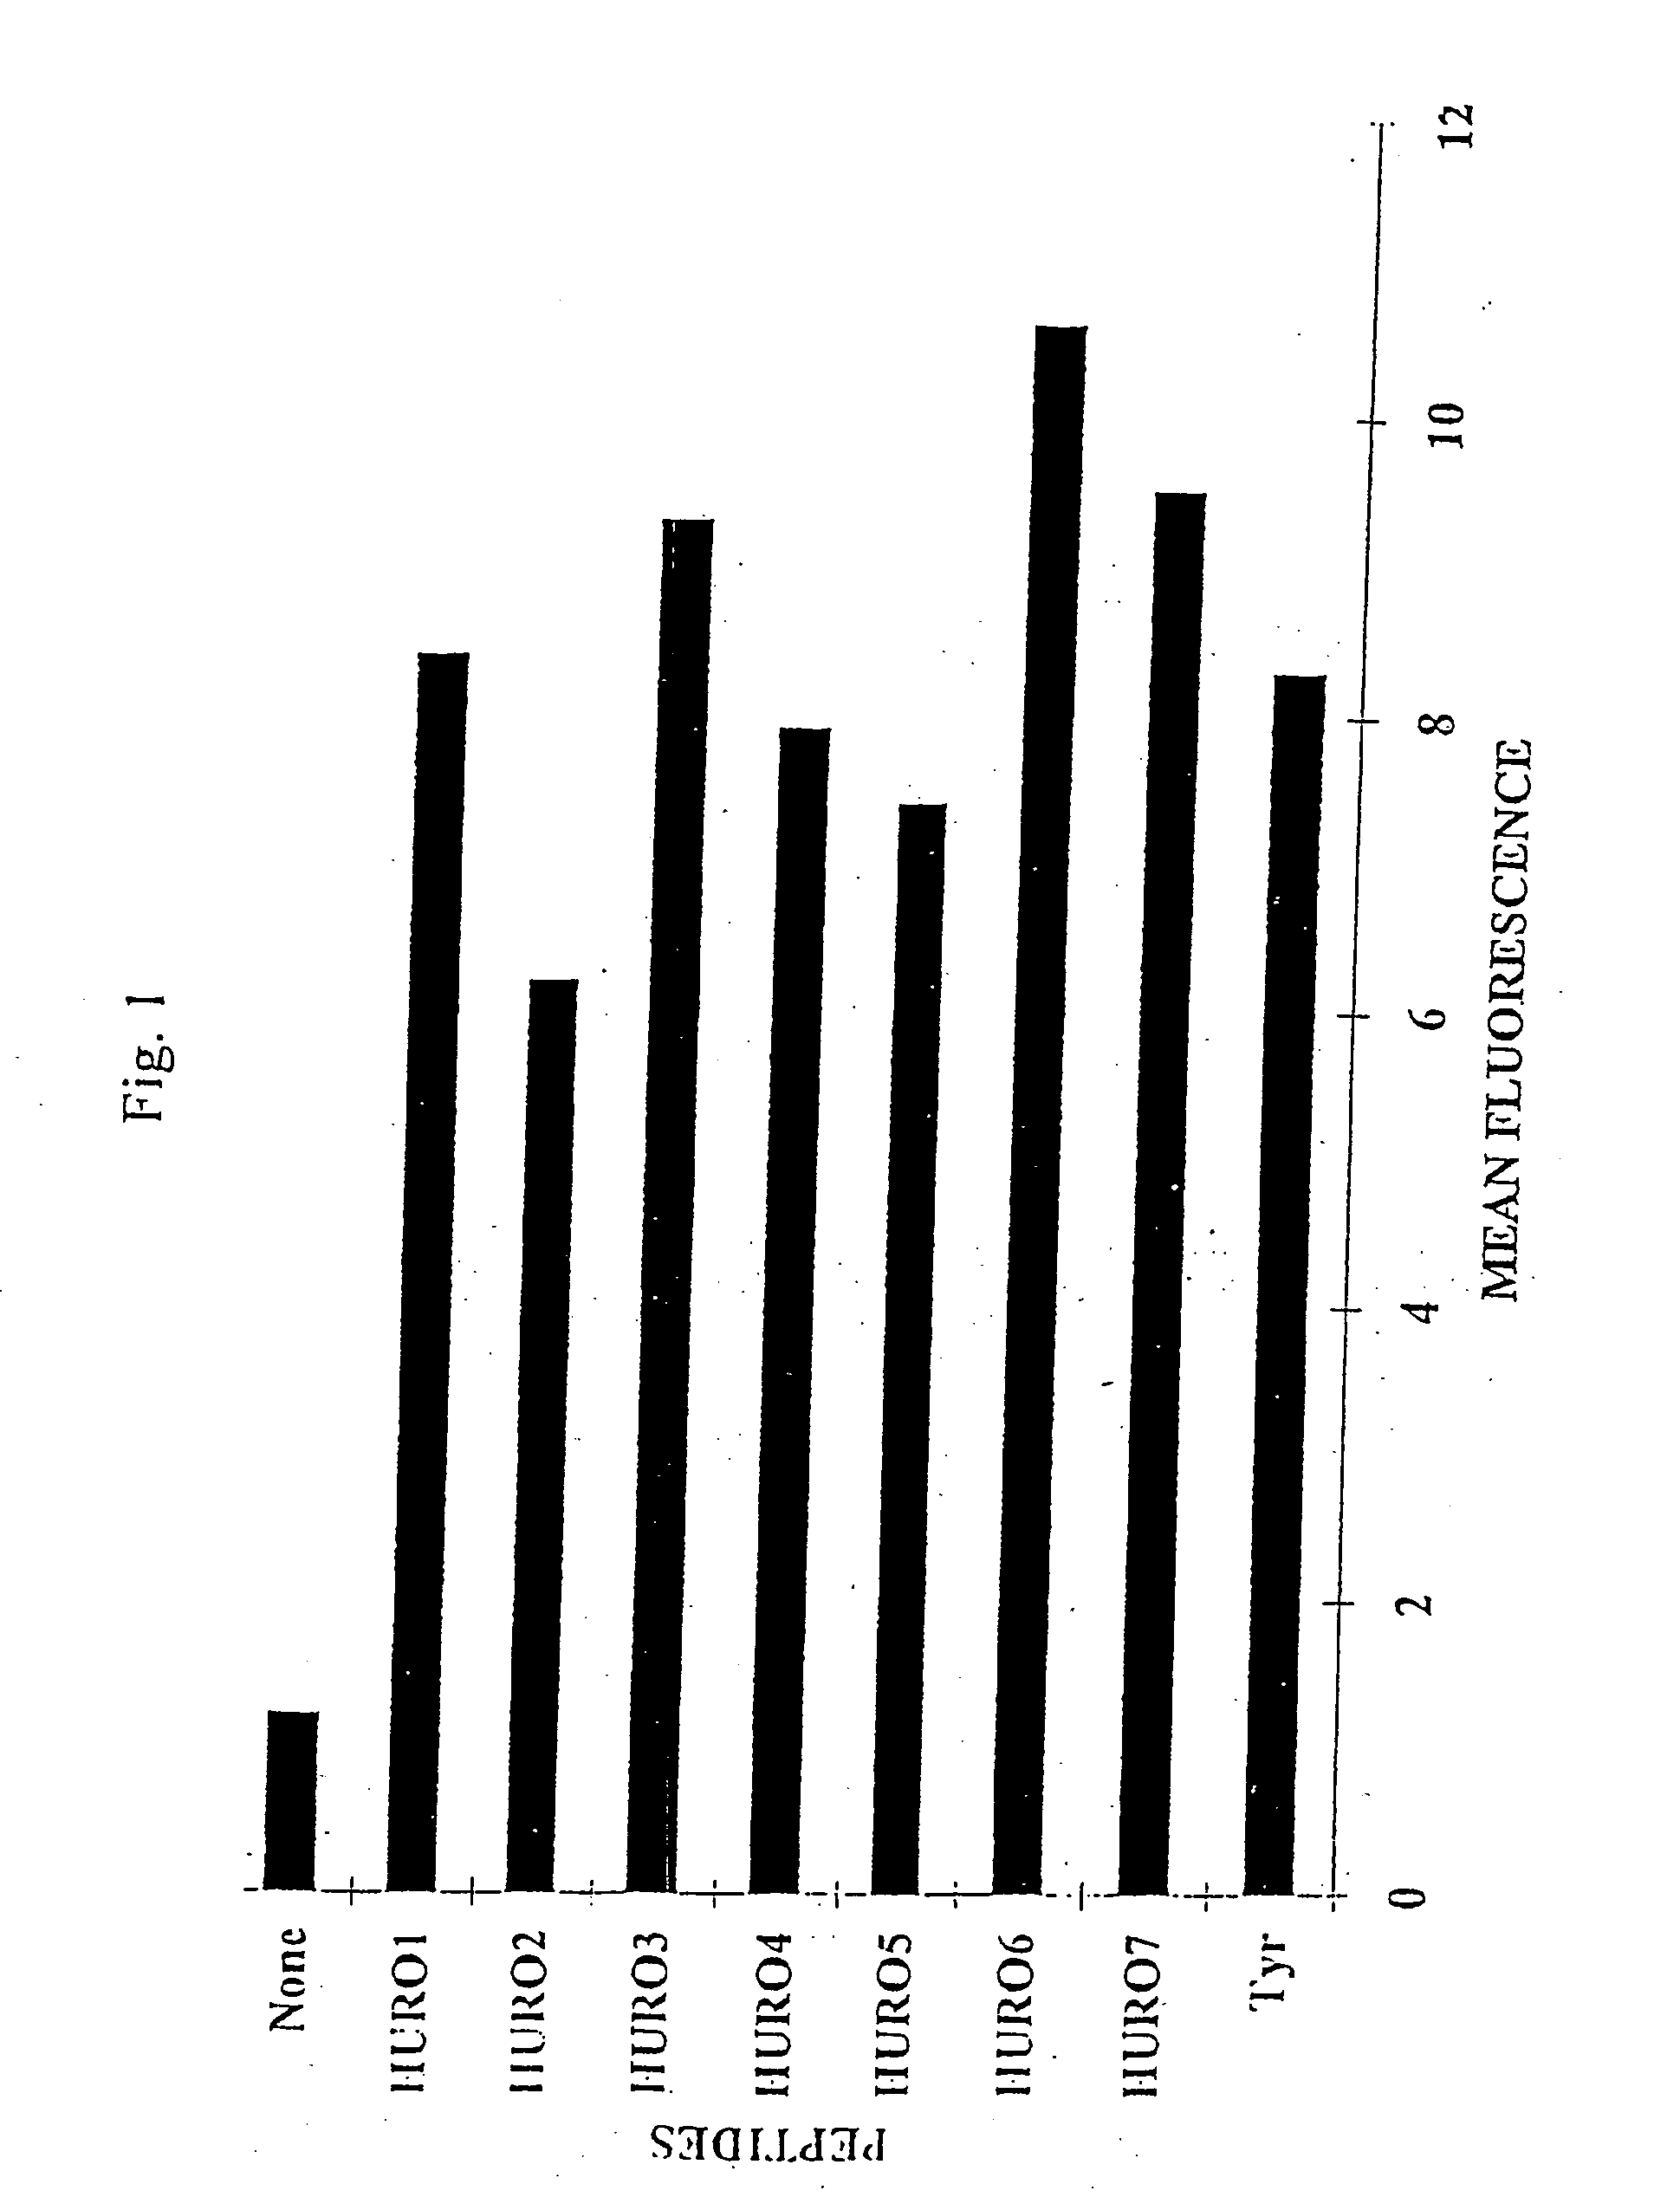 Tumor associated antigen peptides and use of same as anti-tumor vaccines